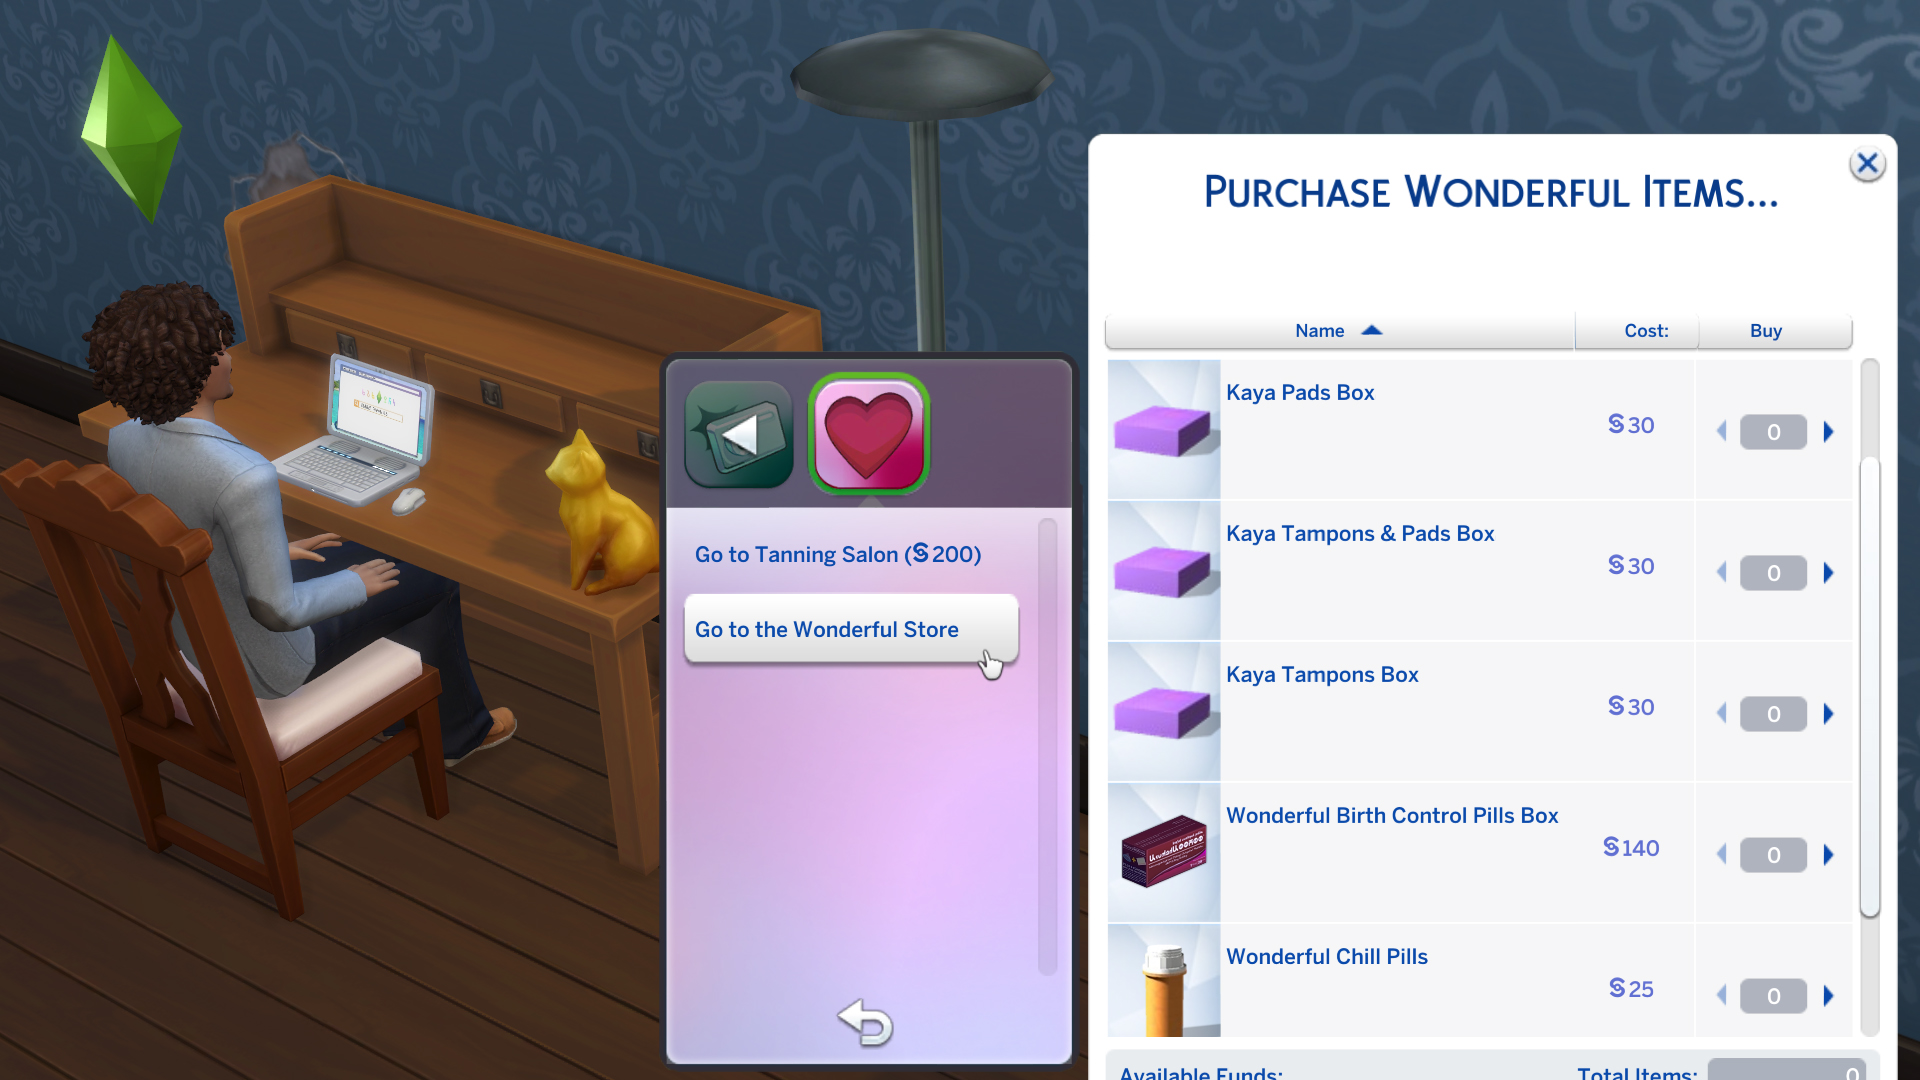 Whims sims 4 mods